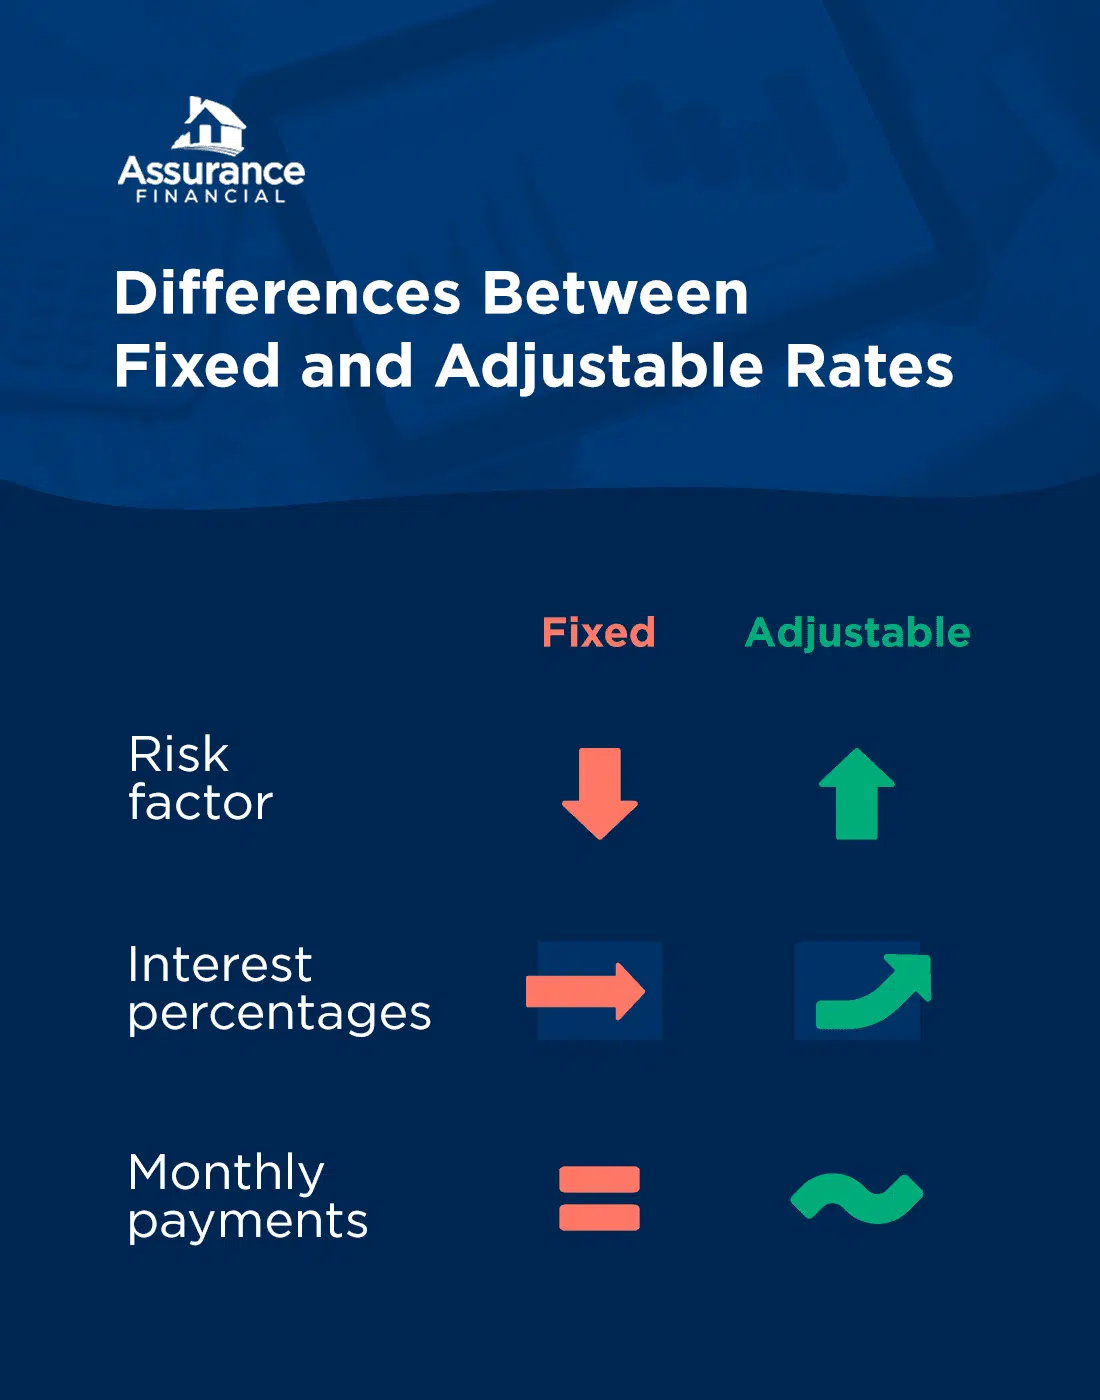 The Differences Between Fixed and Adjustable Rates